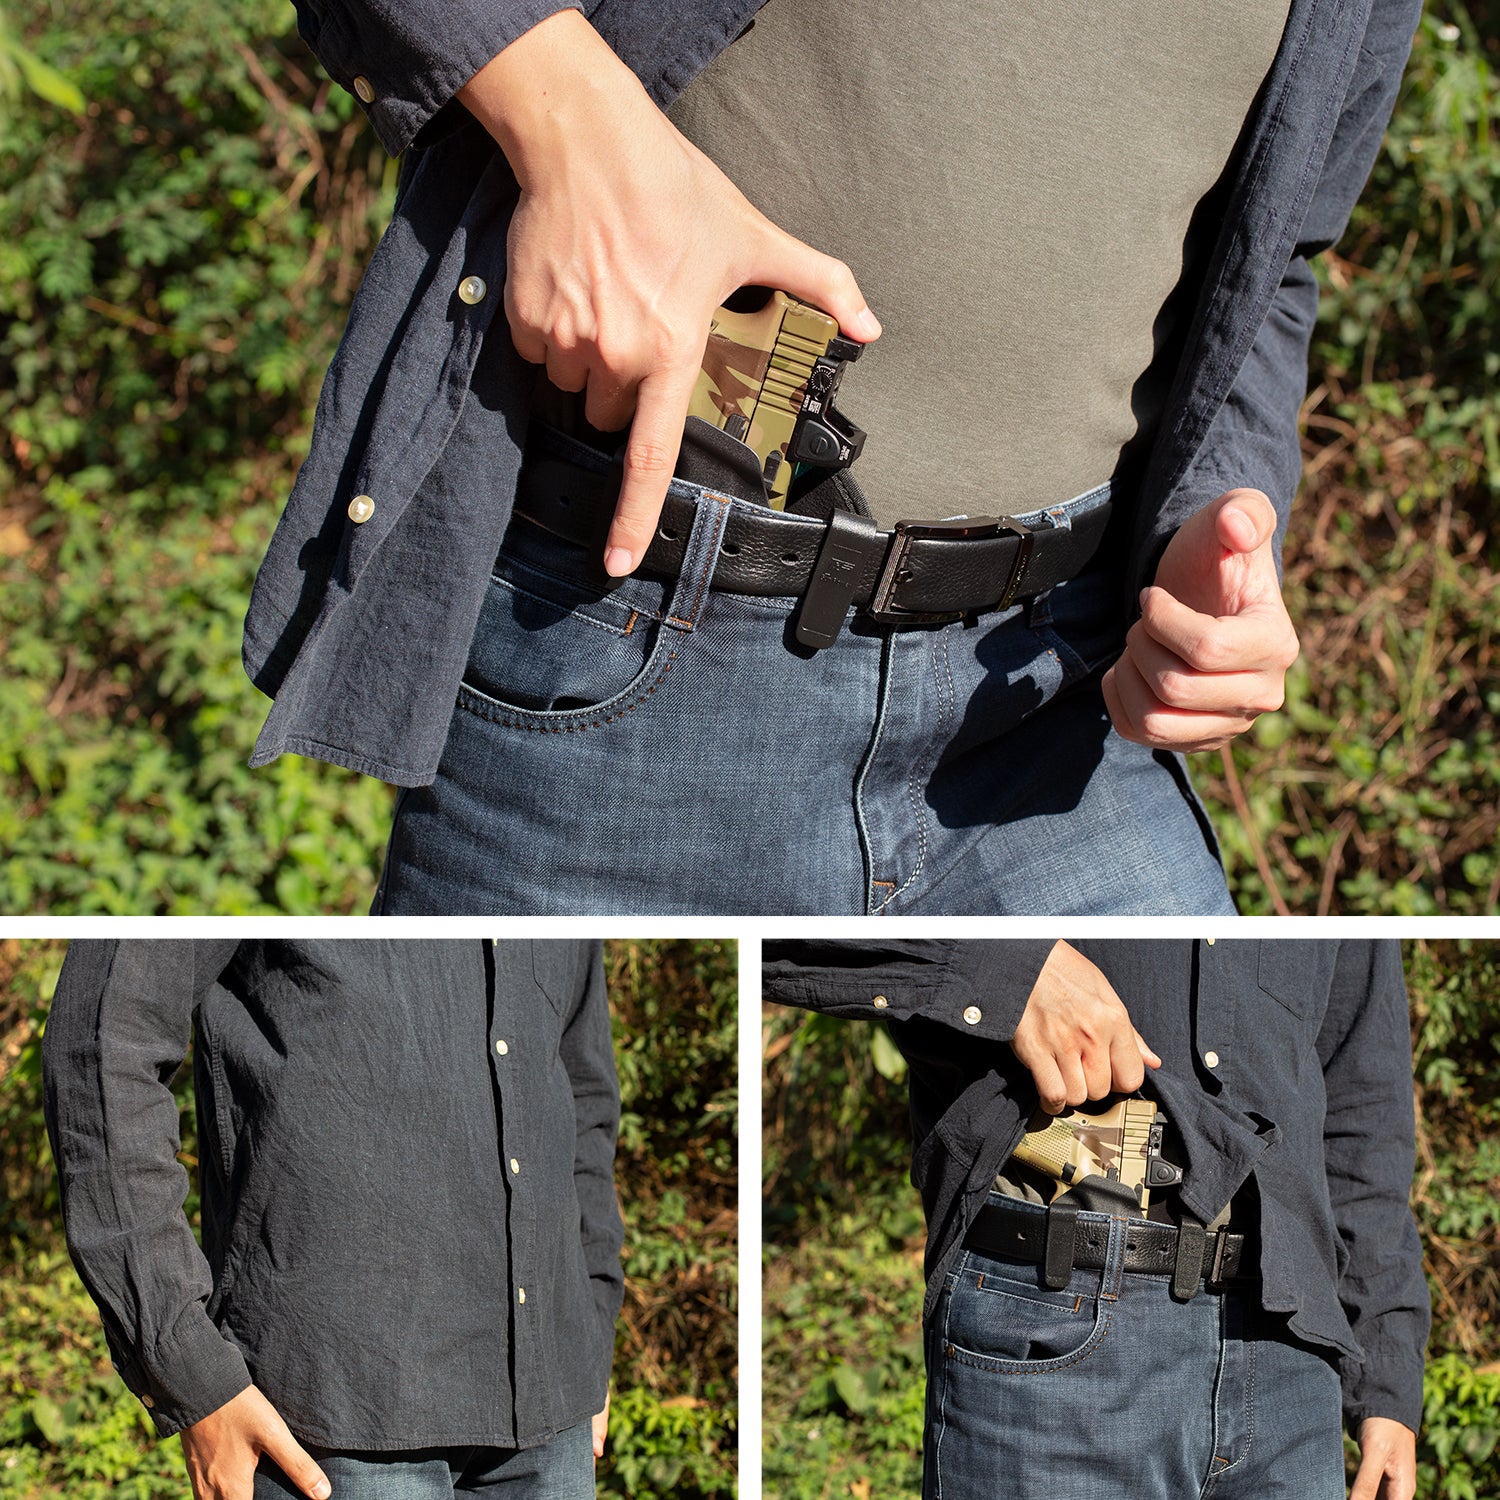 Universal IWB Holster for Concealed Carry, Inside The Waistband